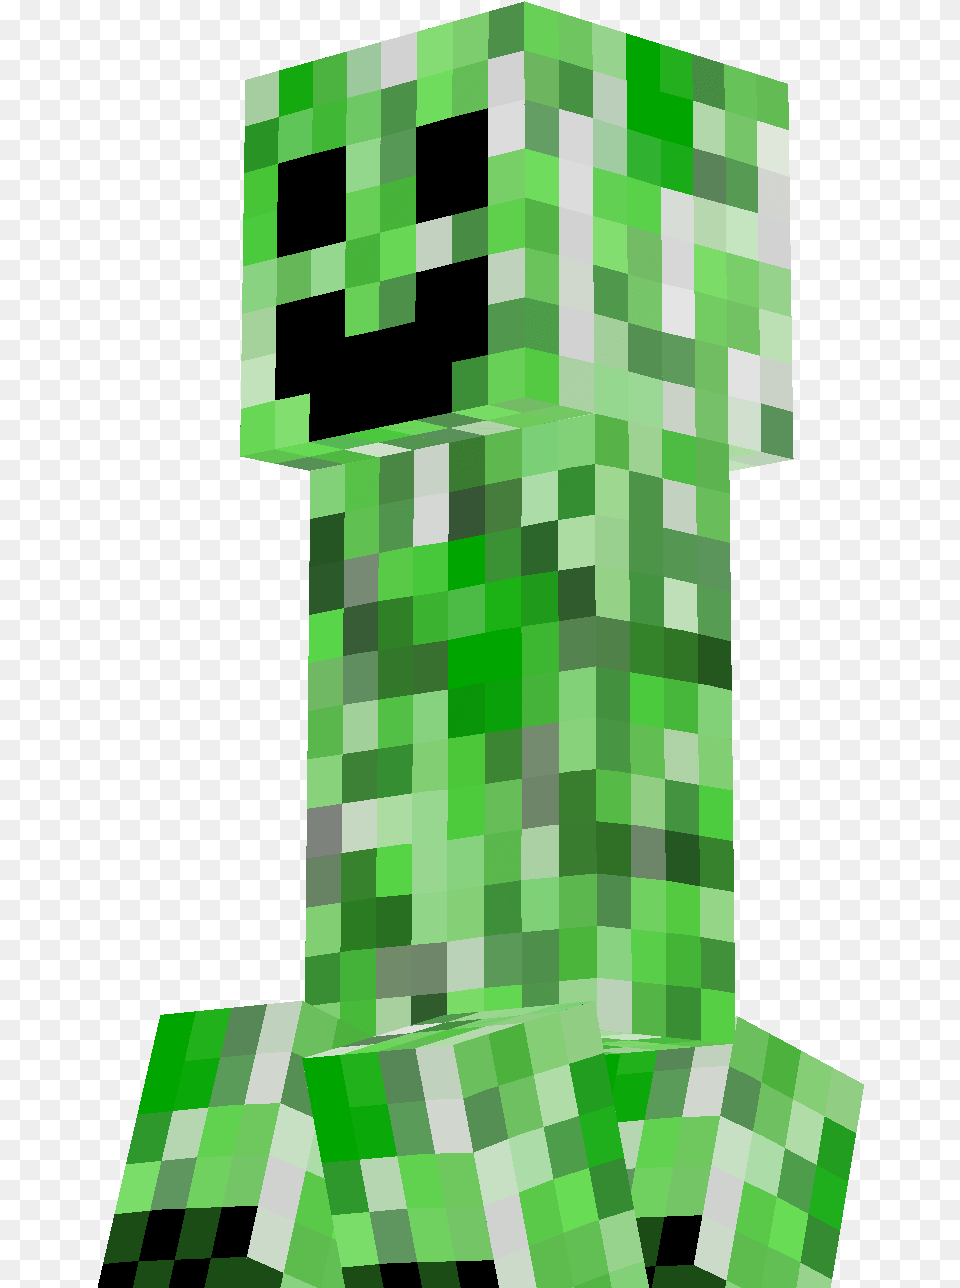 Minecraft Creeper Naman Retreat, Green, Chess, Game, Accessories Free Png